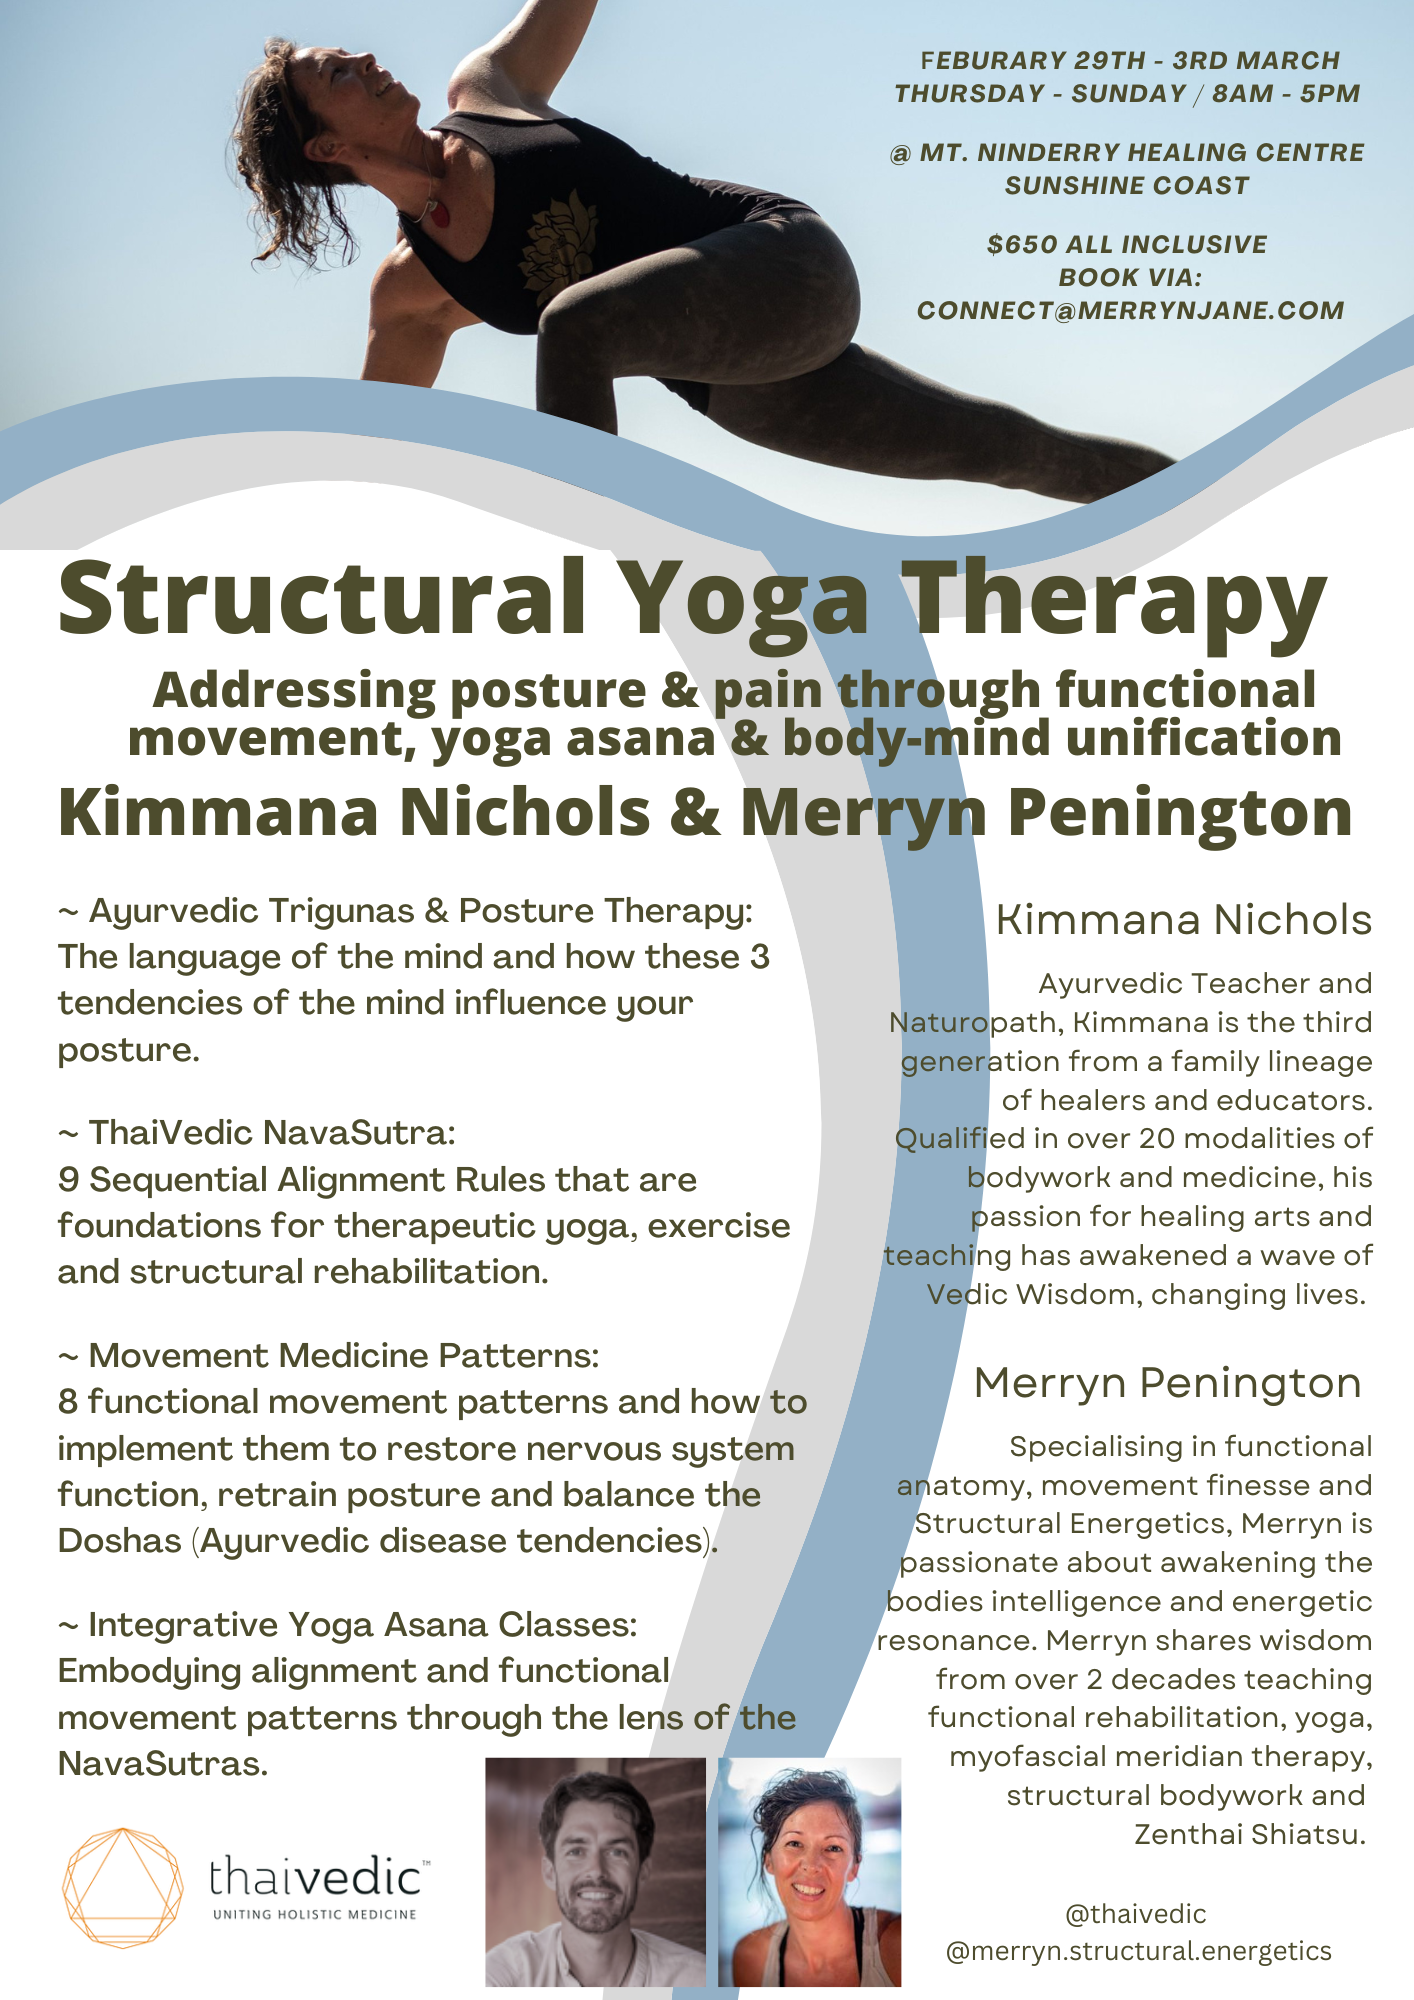 Is your body in correct alignment? - North Shore Structural Integration